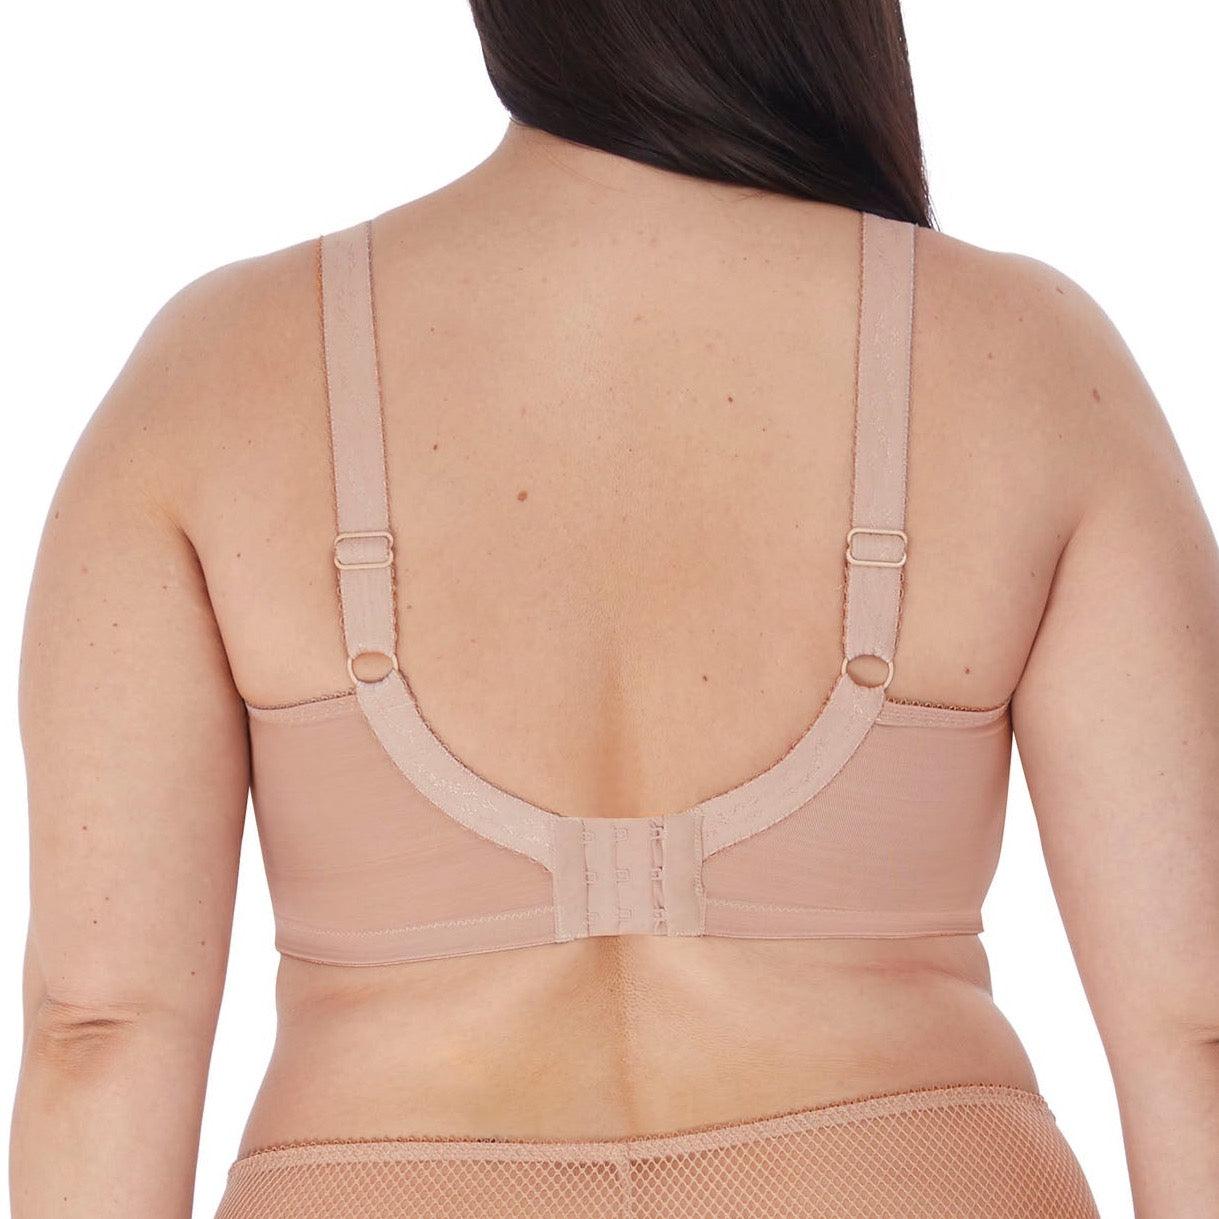 Elomi Charley UW Moulded Spacer Bra (DD-HH)